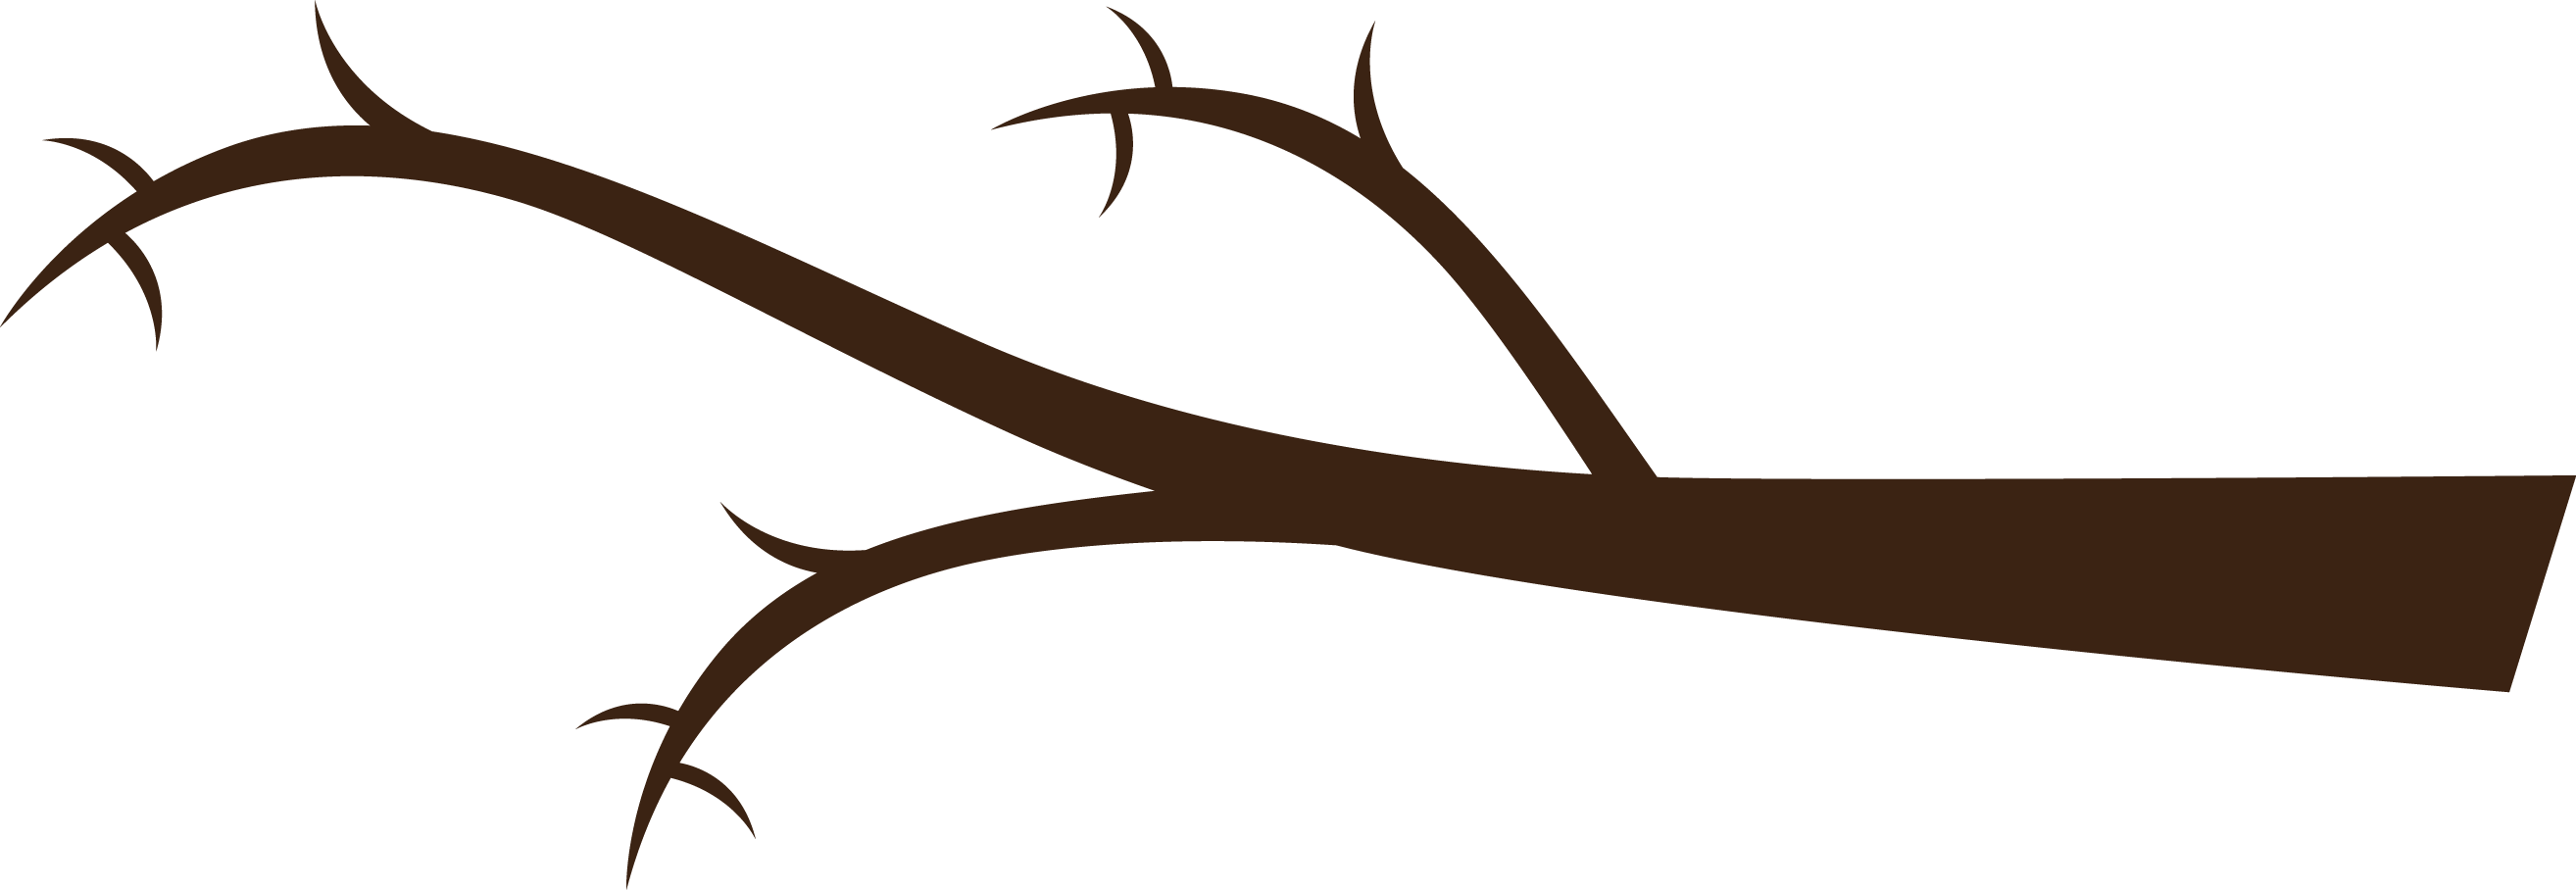 clipart tree branch silhouette - photo #12